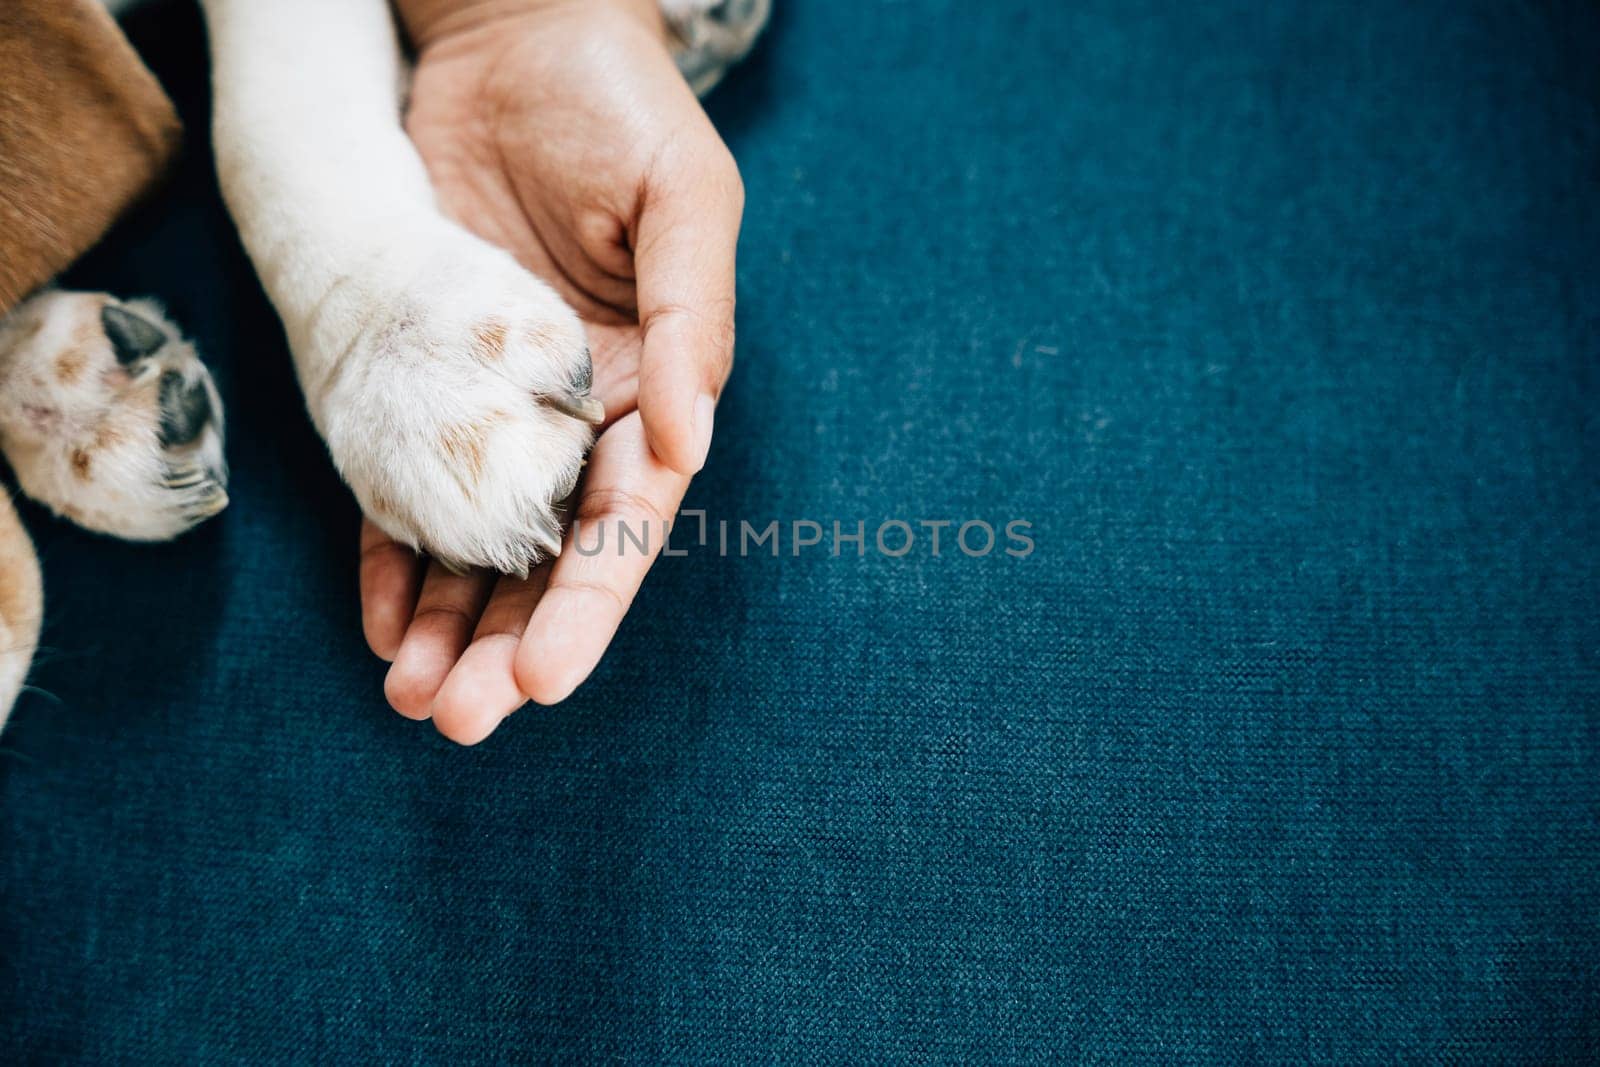 Heartwarming of togetherness and support, a woman hand gently holds a dog paw, symbolizing deep trust, loyalty and friendship that define unique bond between humans and their canine companions. by Sorapop